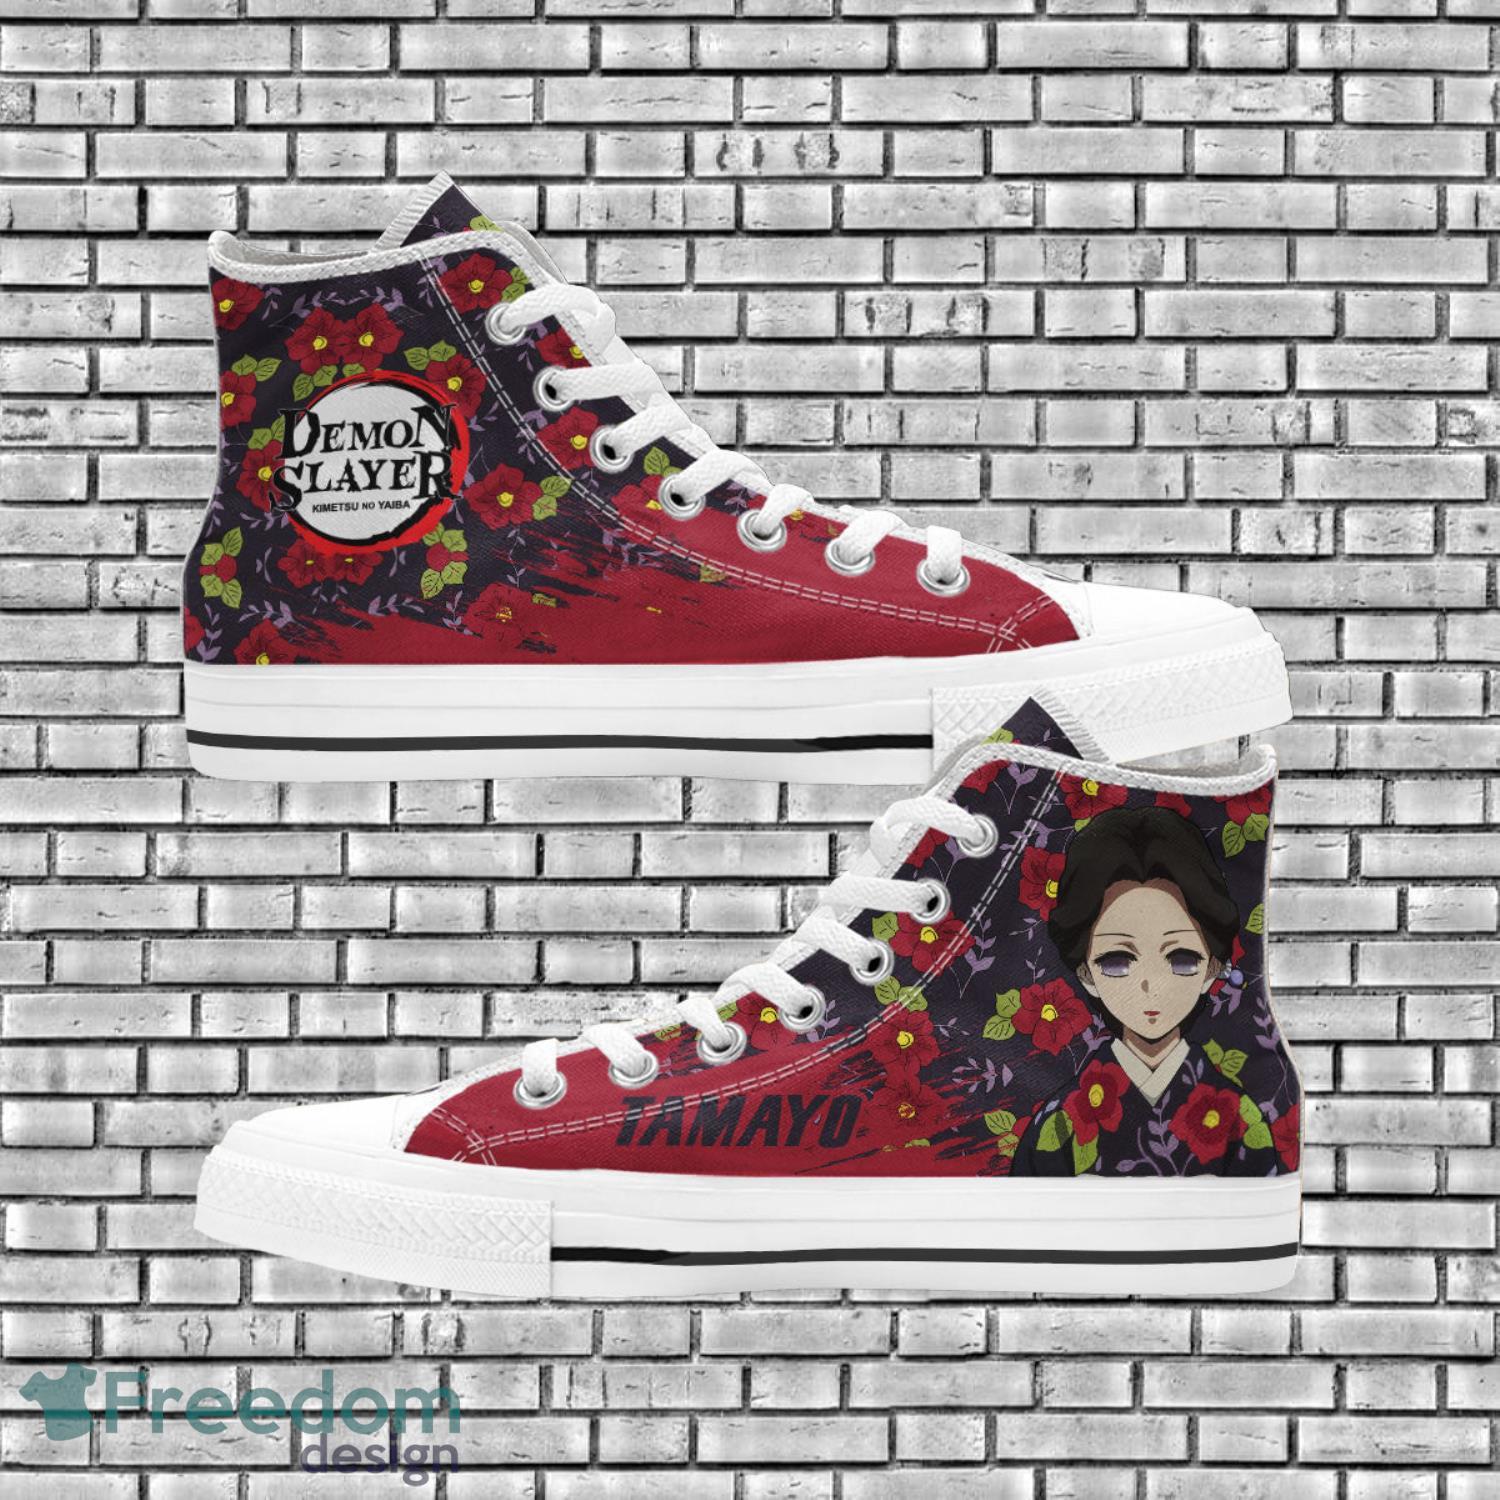 Demon Slayer Anime Fans Tamayo High Top Shoes Product Photo 1